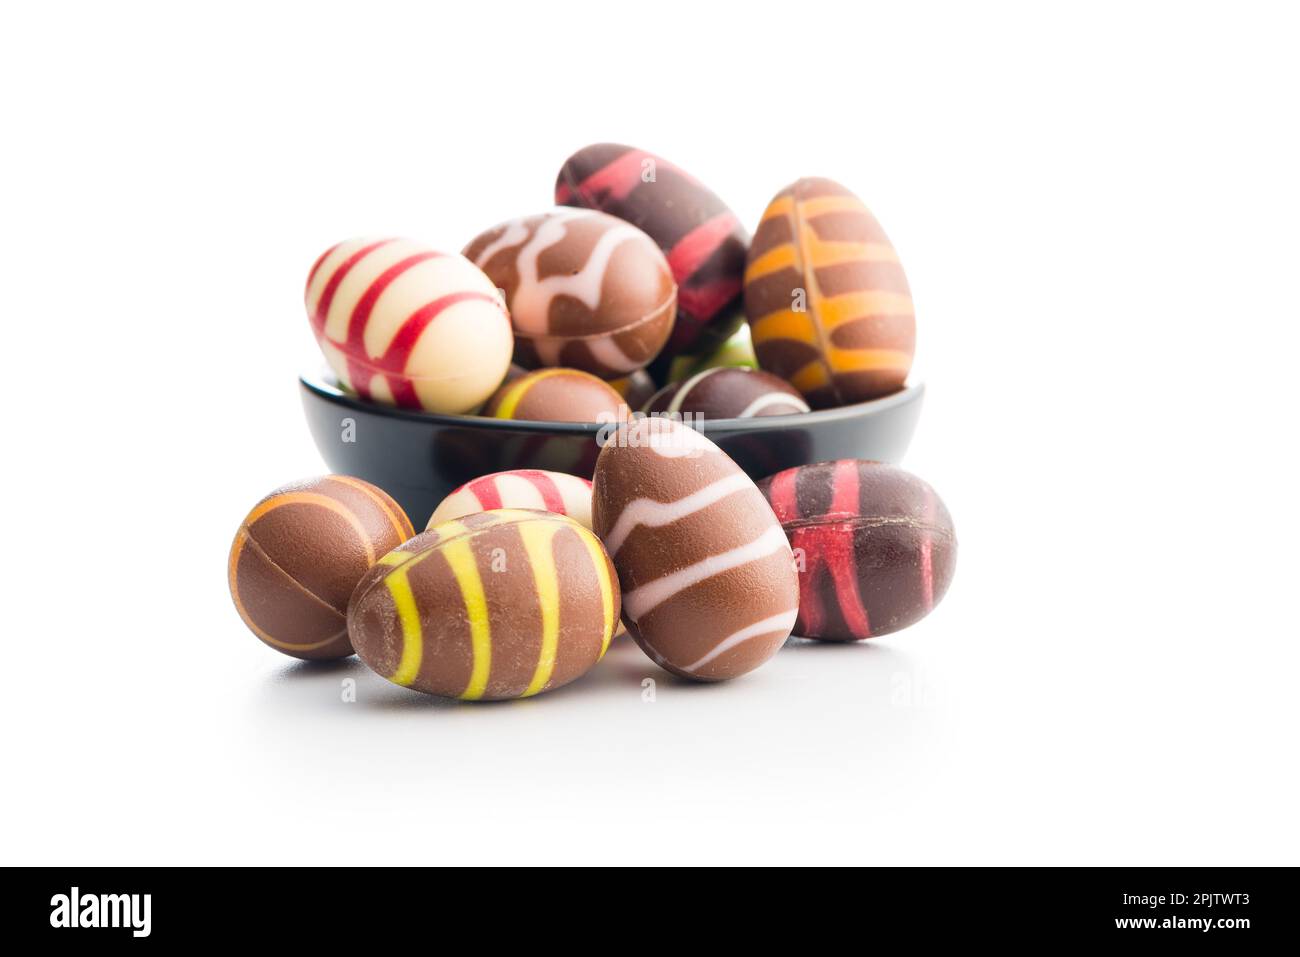 Milk chocolate eggs Cut Out Stock Images & Pictures - Page 3 - Alamy